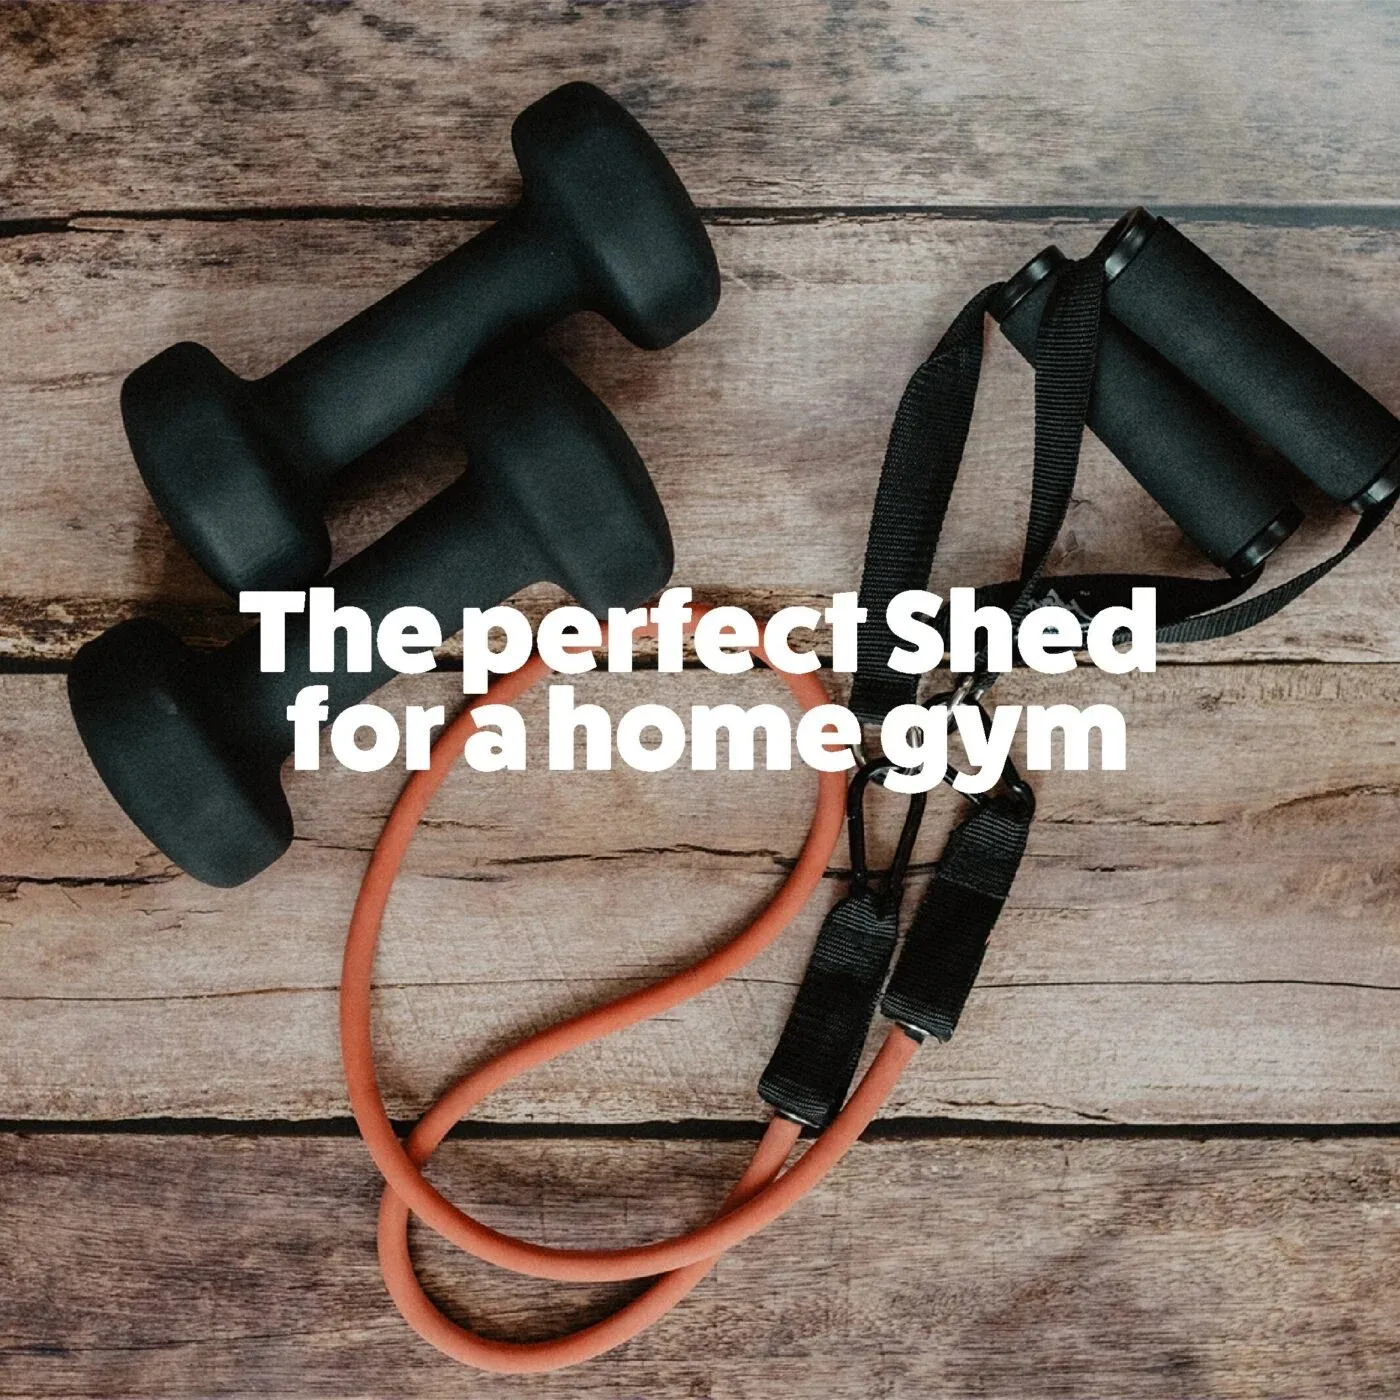 The perfect shed for a home gym